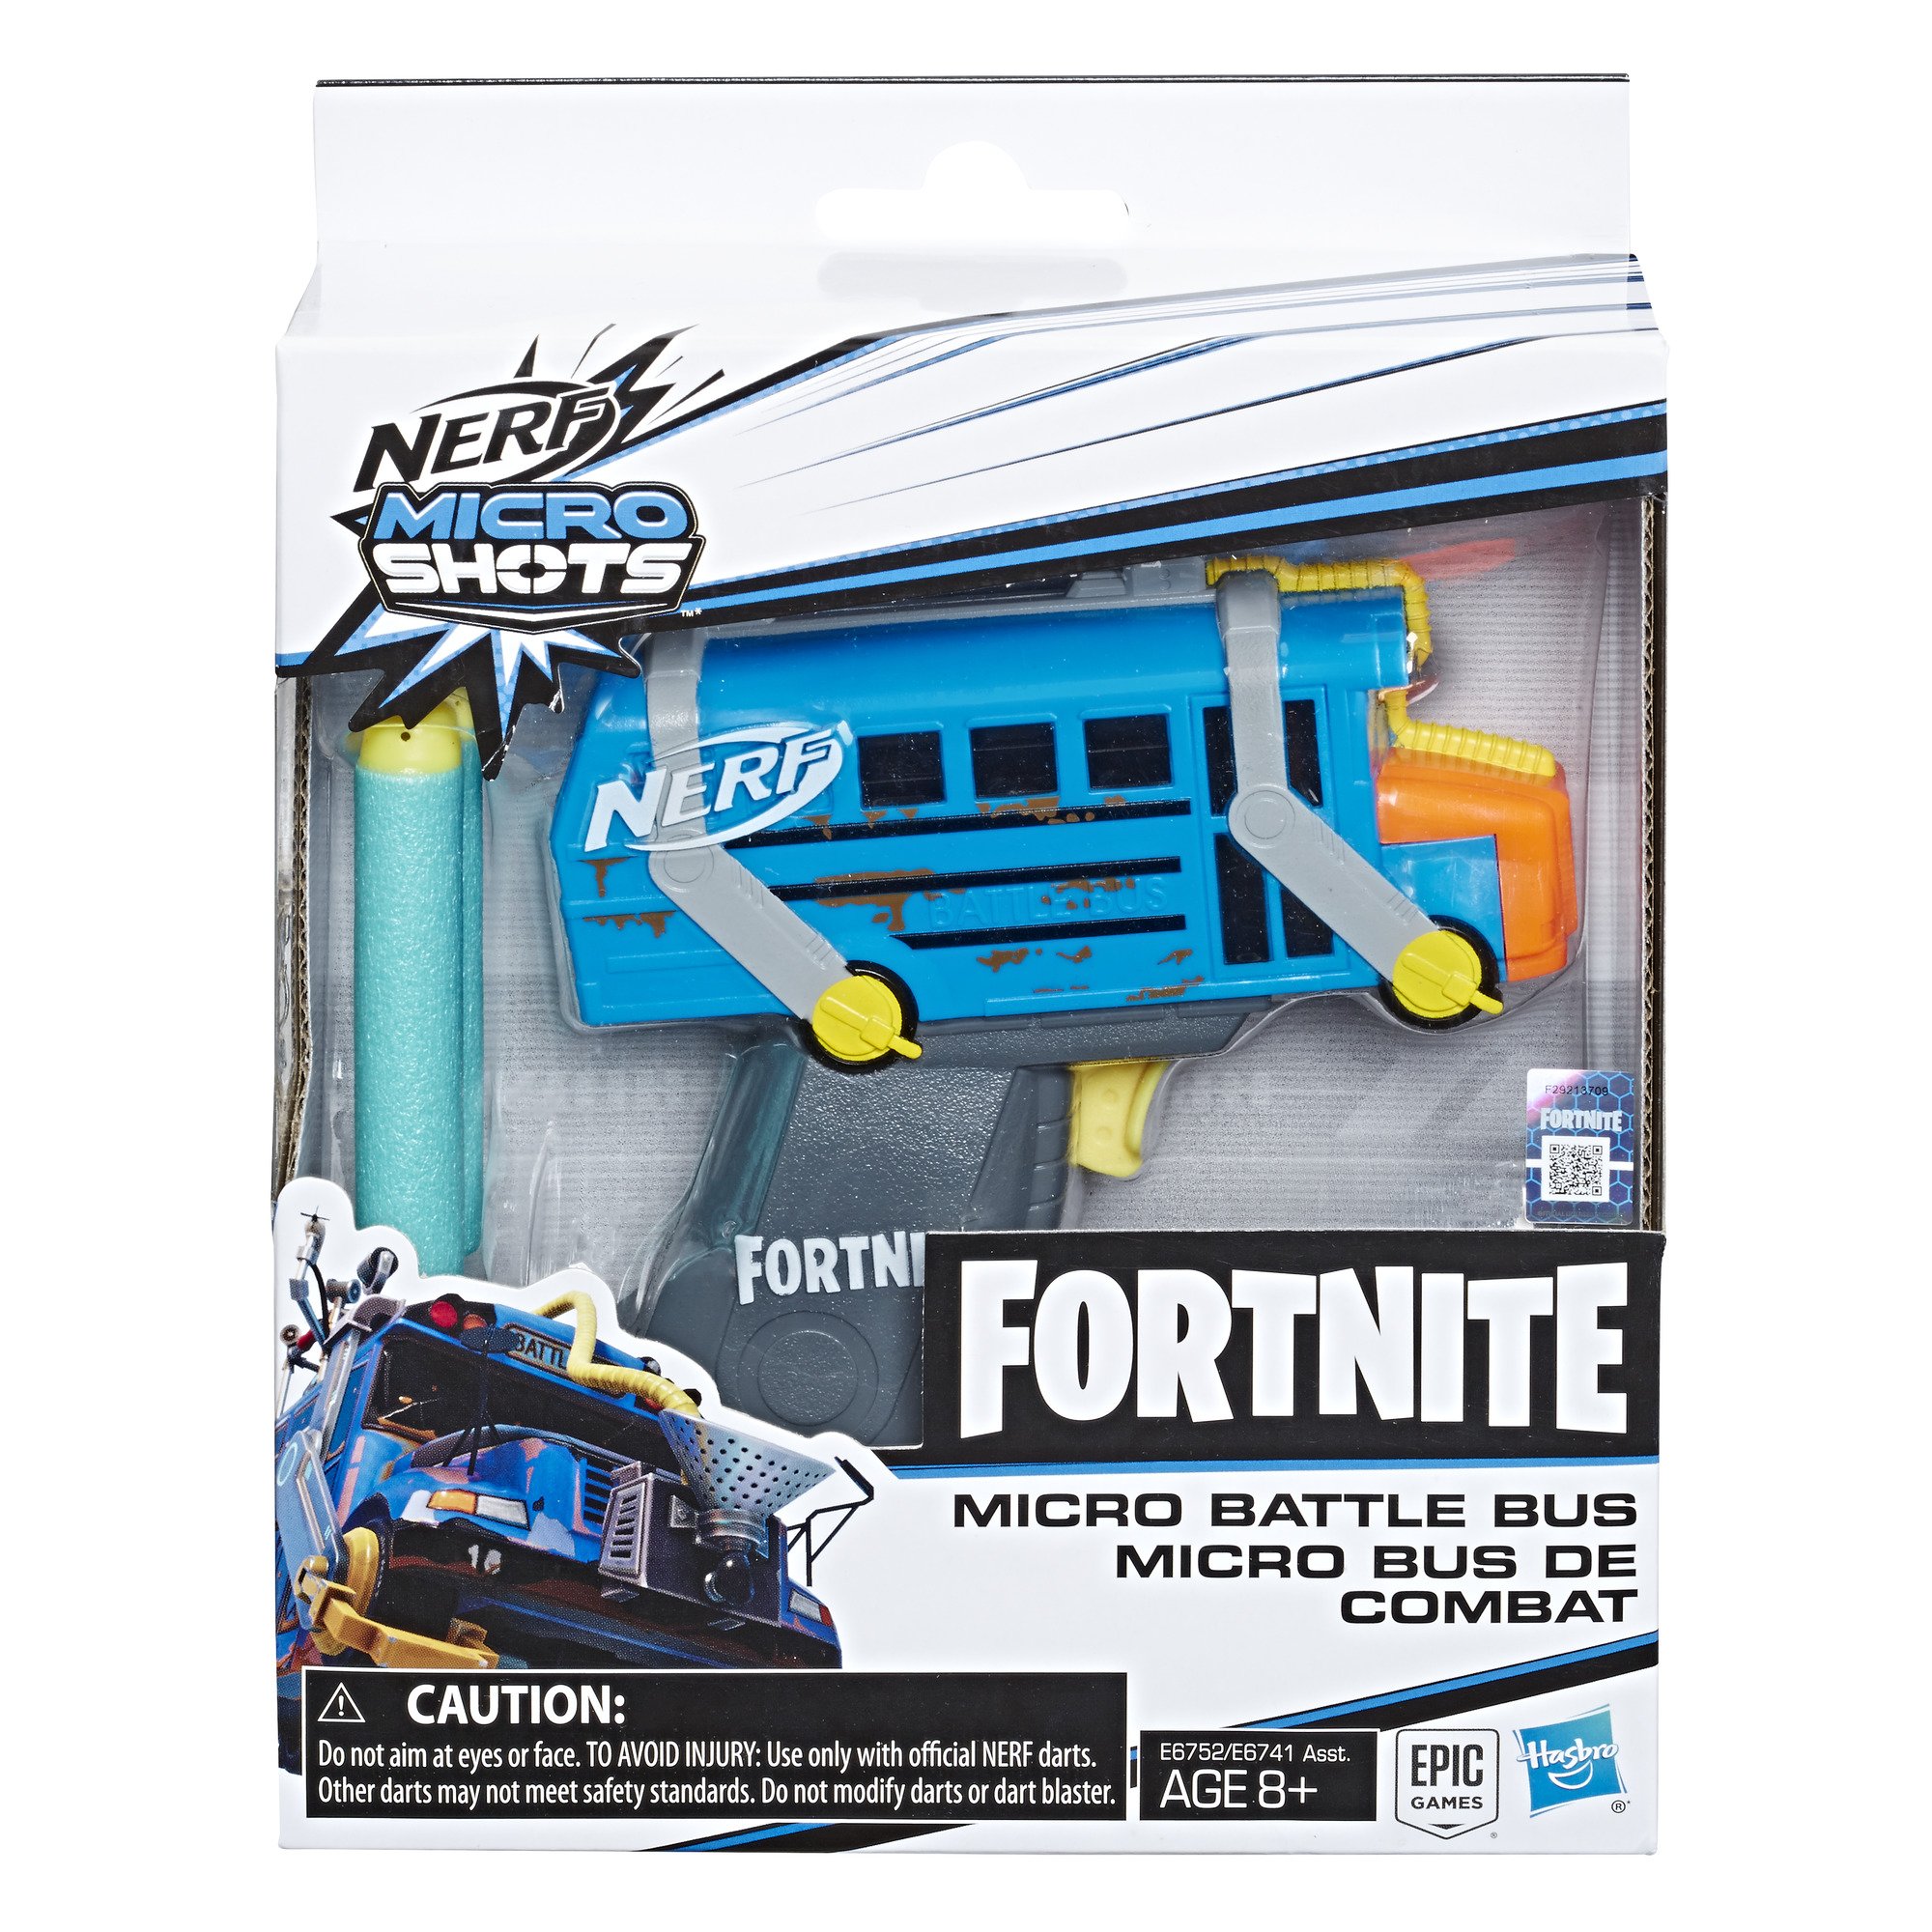 Fortnite signed a multi-year contract with Hasbro